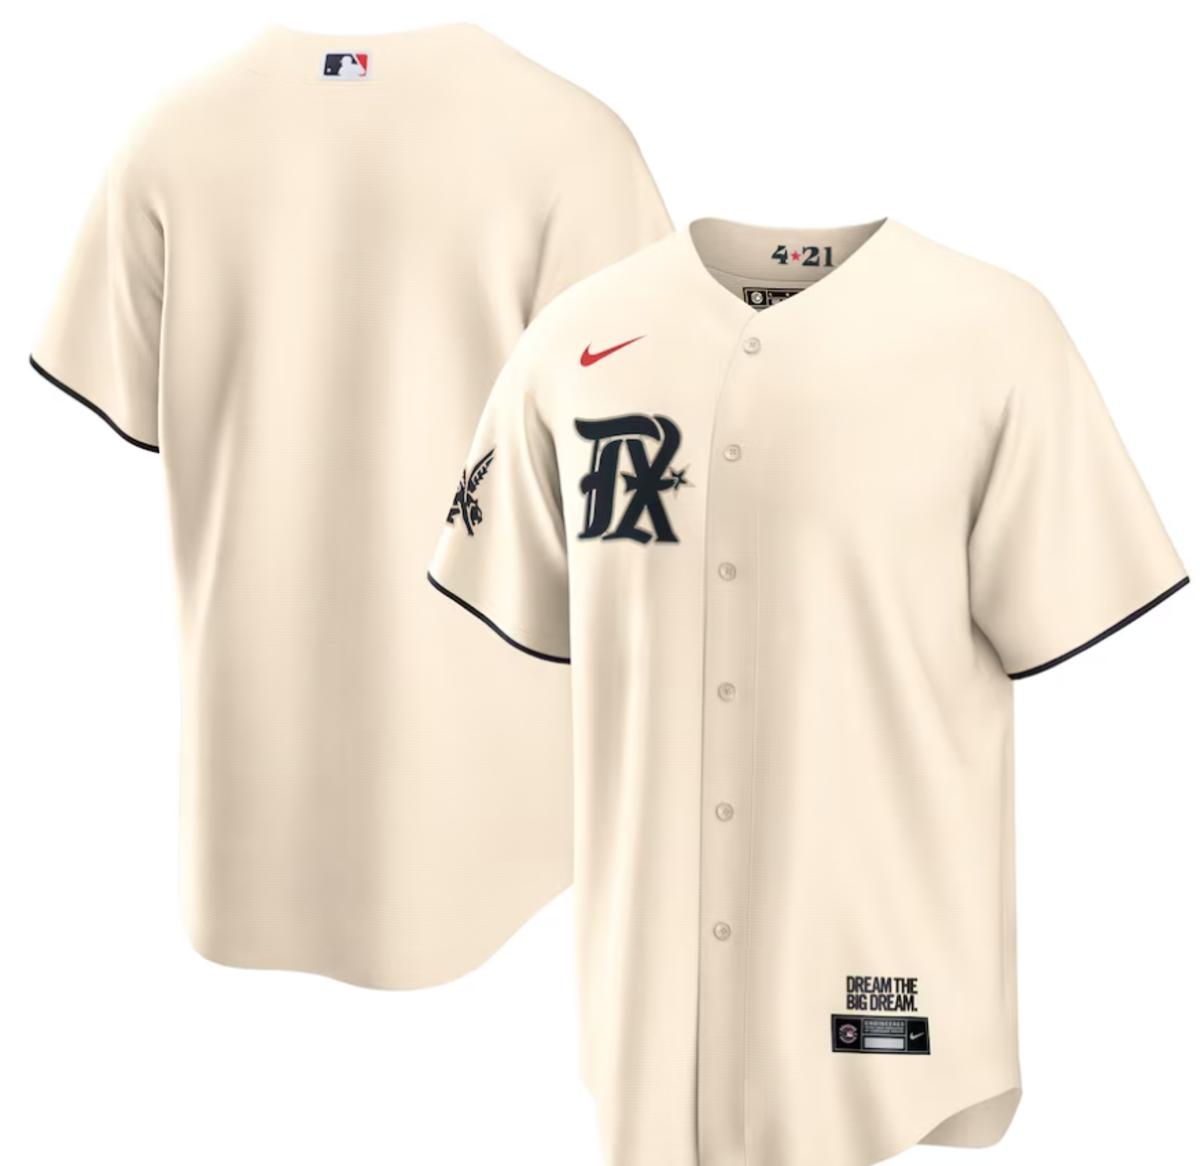 Six more MLB teams wearing City Connect uniforms in 2023